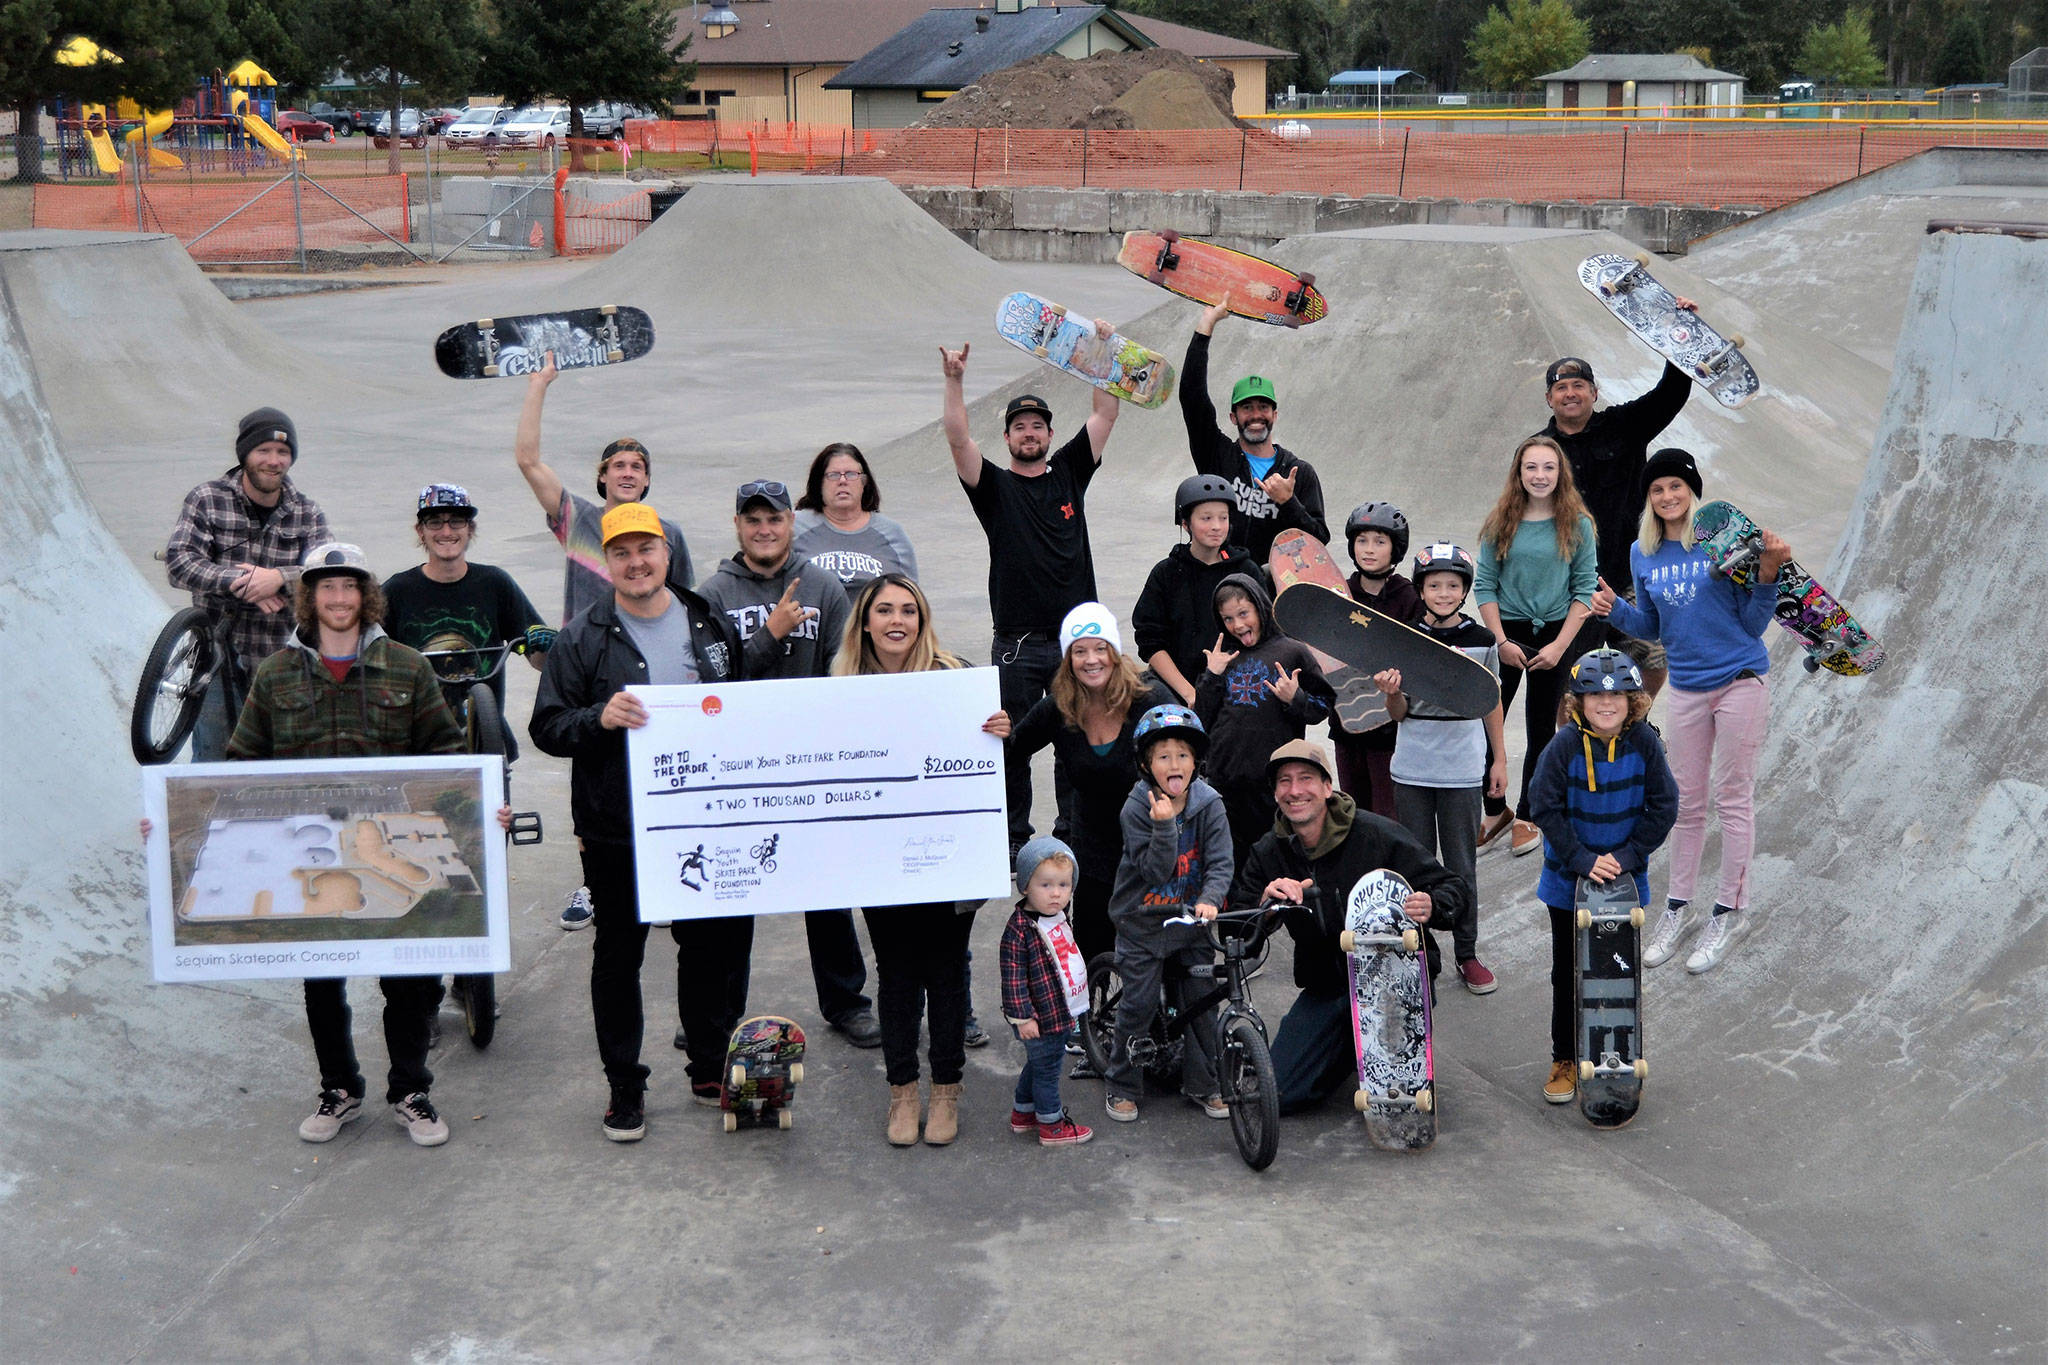 Local riders at Sequim Skate Park gather to accept a $2,000 check on Oct. 6 from the TeamInspire Project, founded by members of the band Emblem3. Funds will go towards a goal of expanding and fixing the exiting skate park. Sequim Gazette photo by Matthew Nash